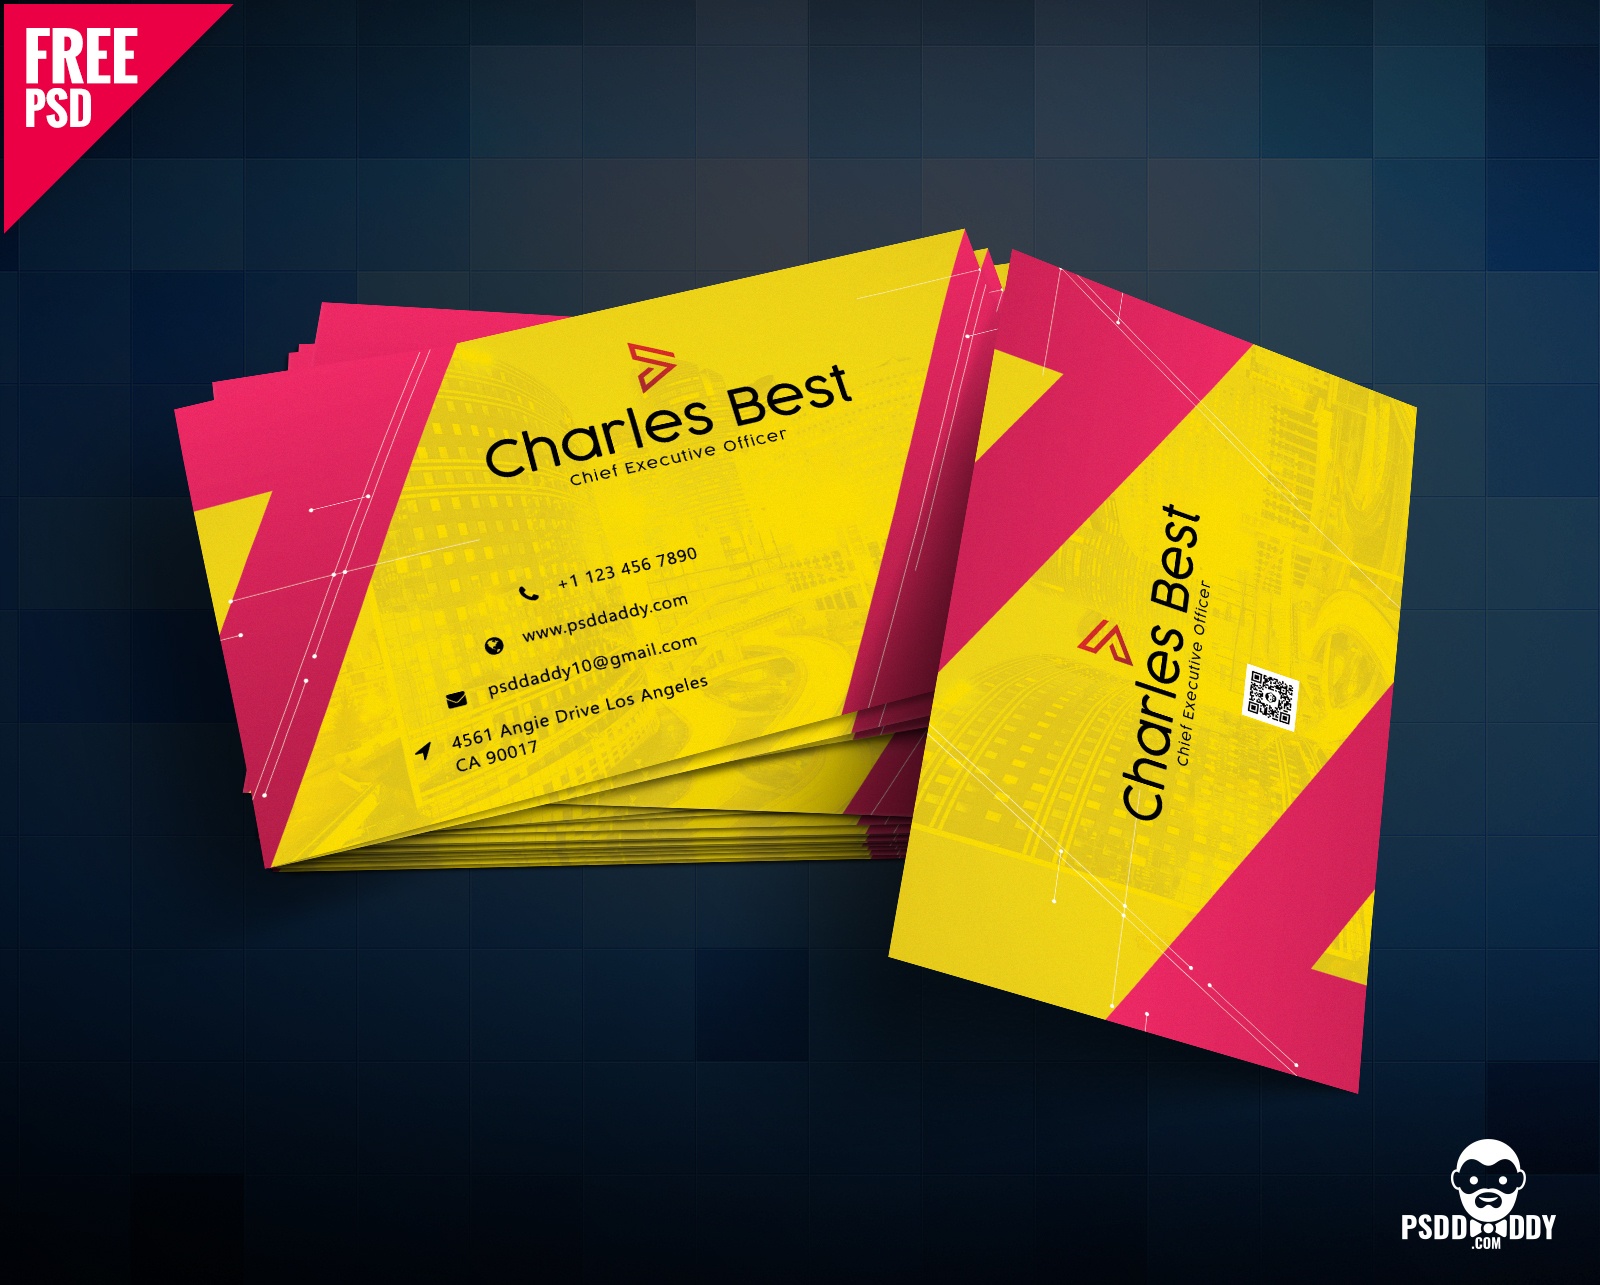 Download] Creative Business Card Free Psd | Psddaddy - Free Printable Business Card Maker